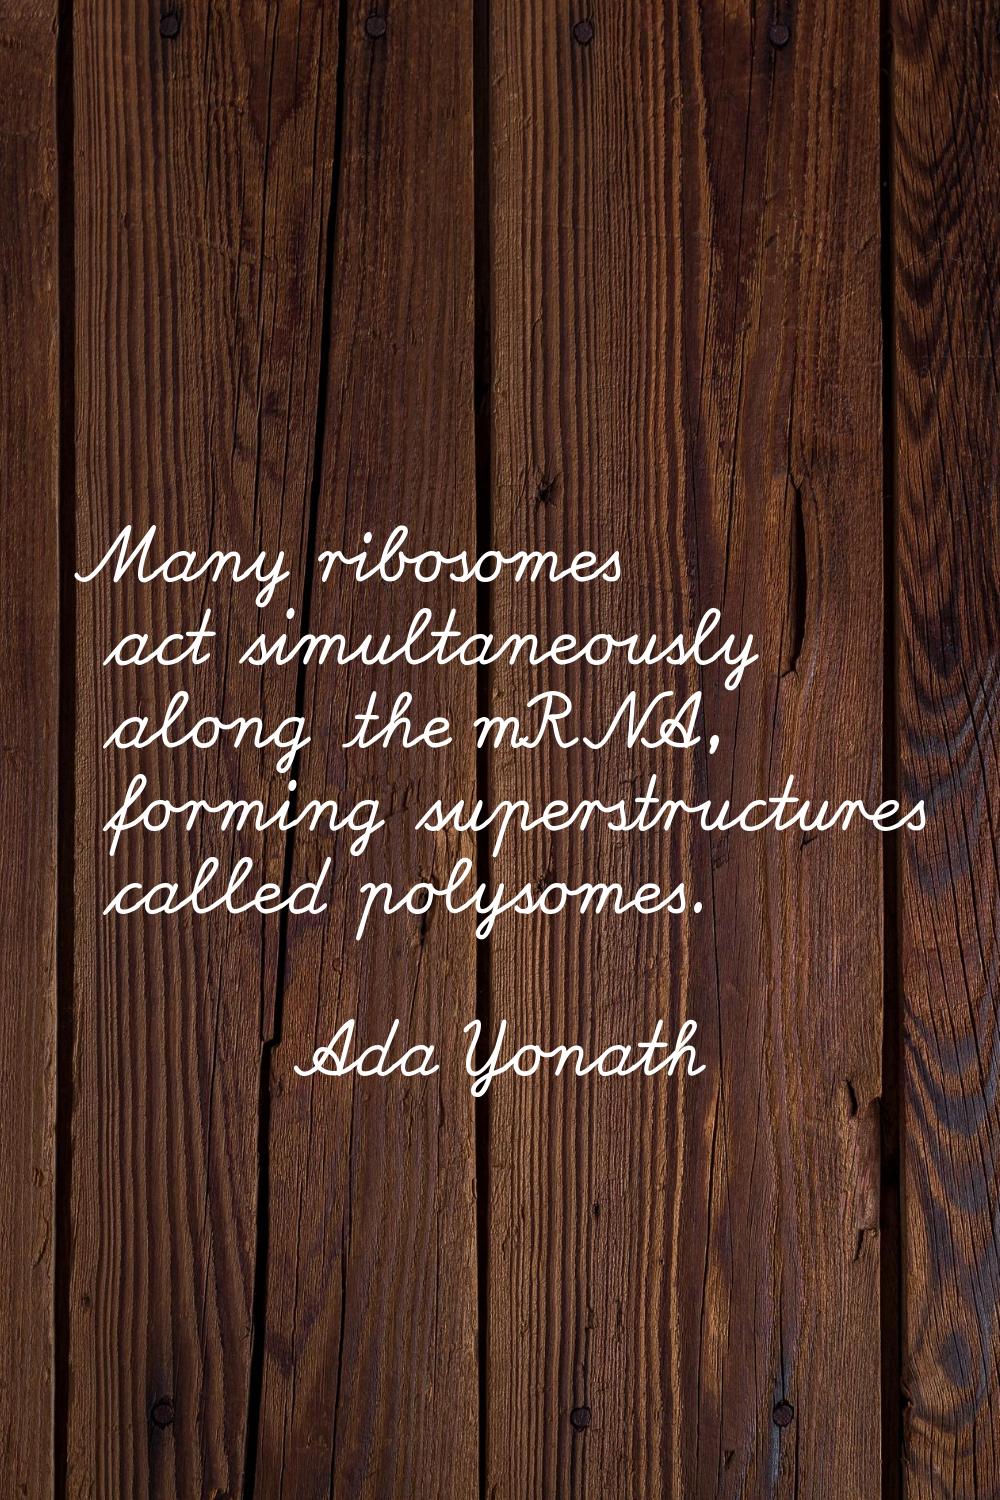 Many ribosomes act simultaneously along the mRNA, forming superstructures called polysomes.